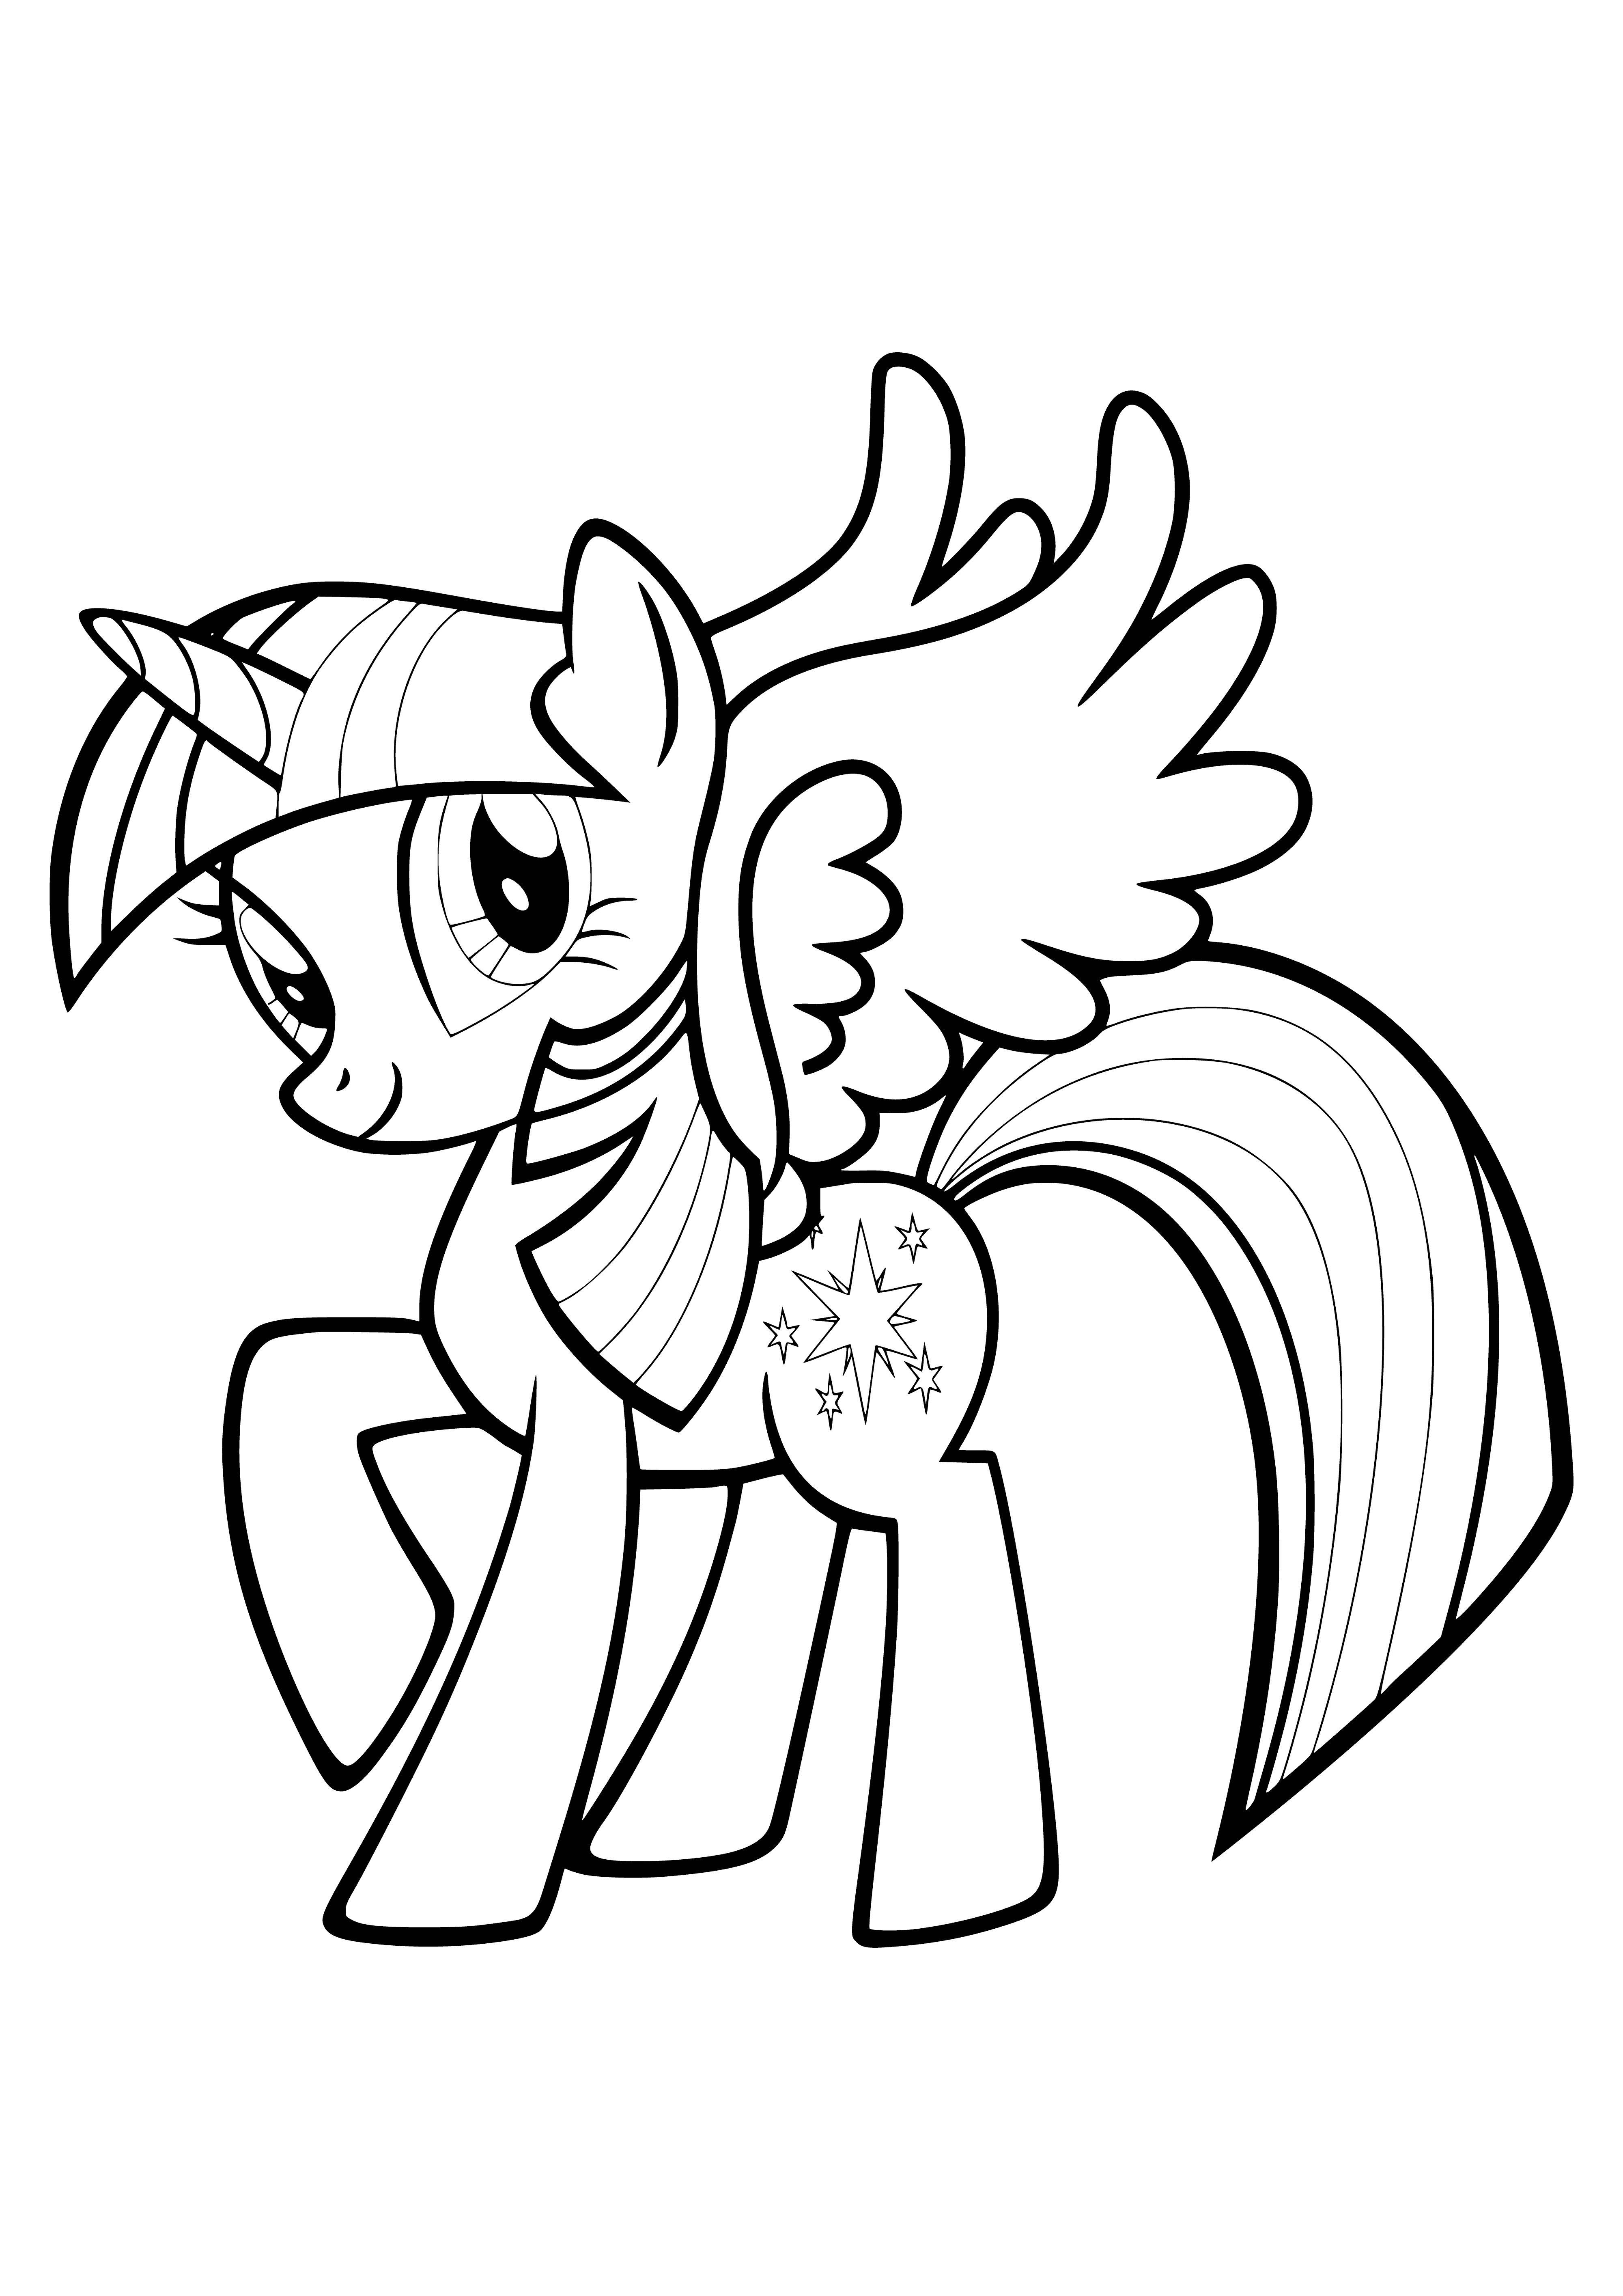 coloring page: White horse w/ purple mane/tail, blue & purple saddle/reins, and blue & purple wings - a Sparkle with wings!